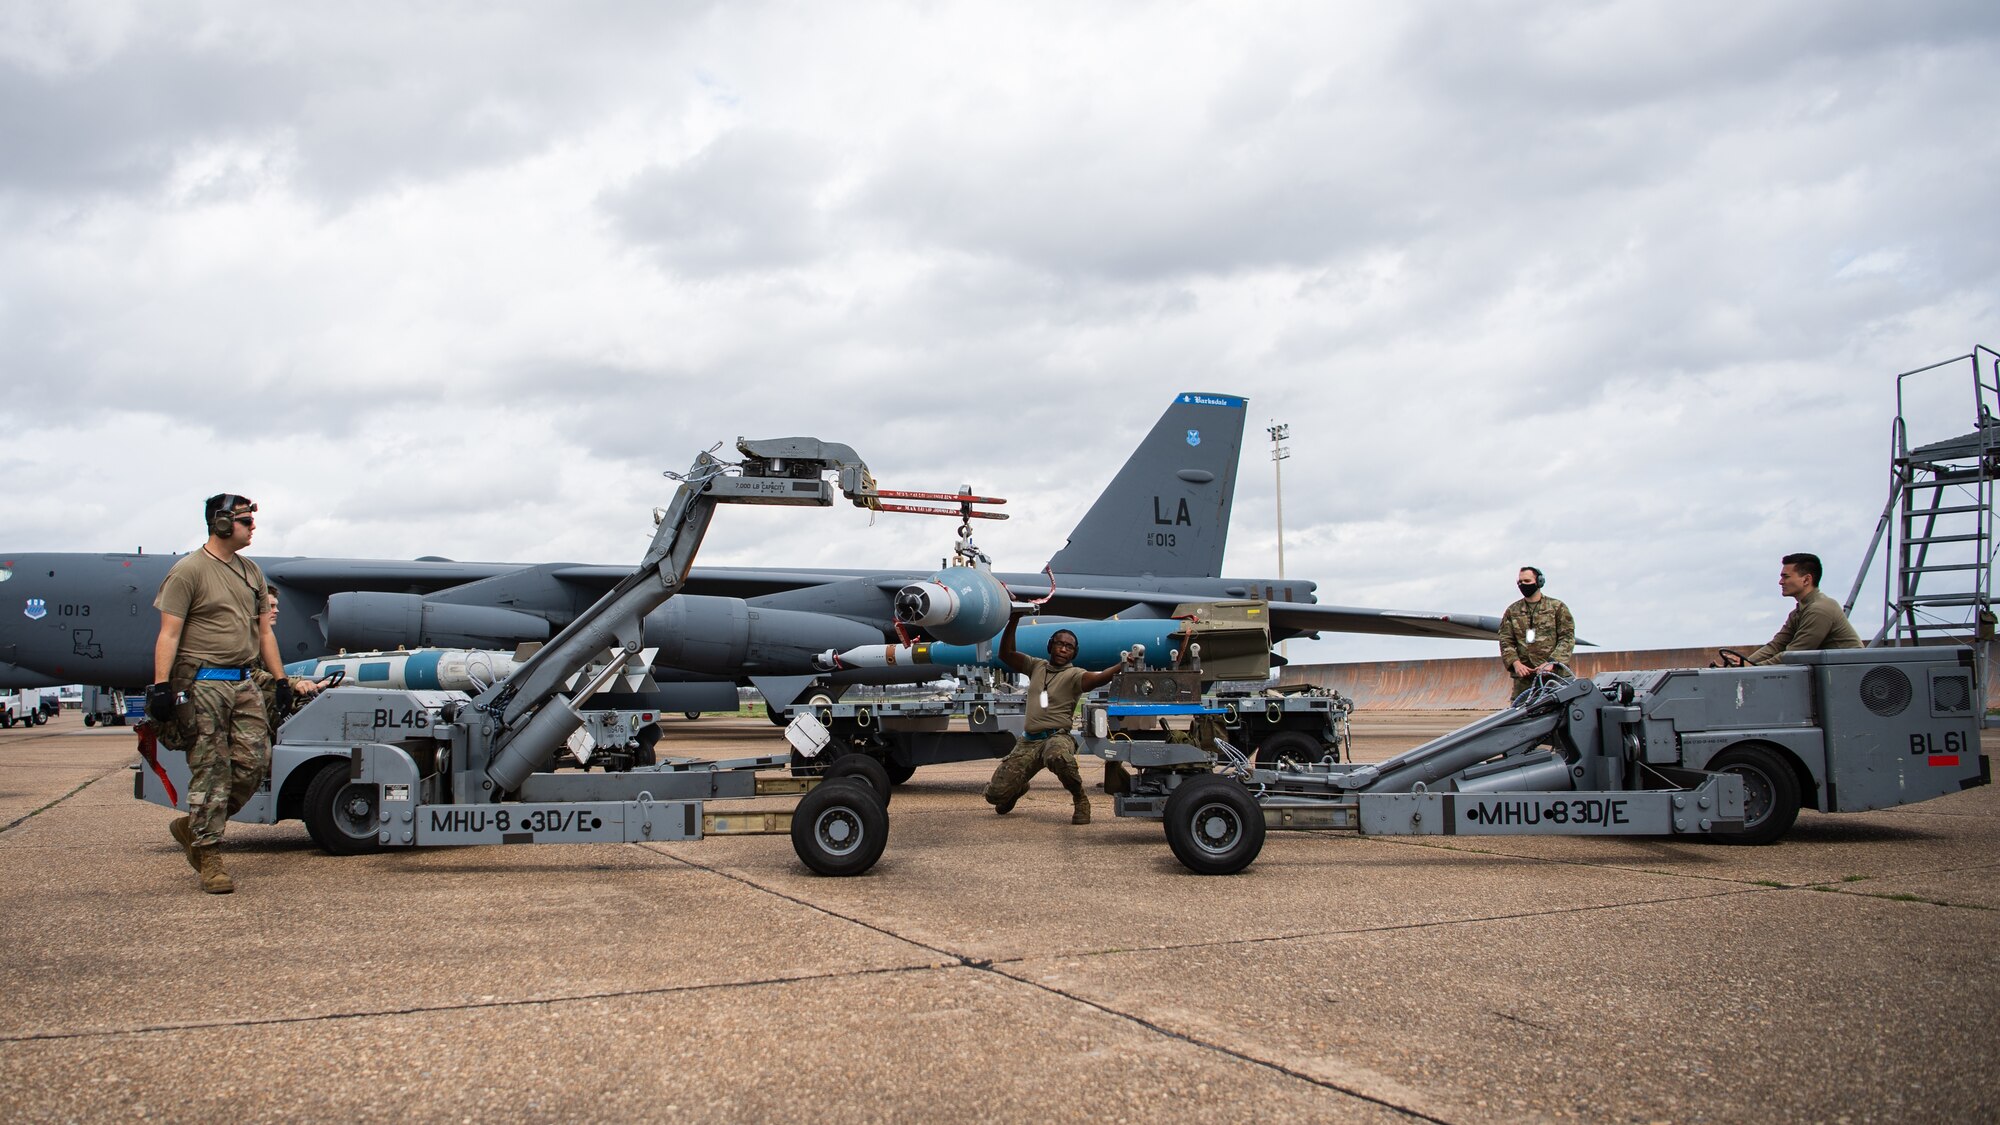 A weapons load crew from the 2nd Aircraft Maintenance Squadron transport a GBU-10 munition to be loaded onto a B-52H Stratofortress during Combat Hammer at Barksdale Air Force Base, La., March 10, 2021. Combat Hammer was a week-long evaluation of the wing’s capacity to generate, load and employ conventional weapons on target. (U.S. Air Force photo by Airman 1st Class Jacob B. Wrightsman)